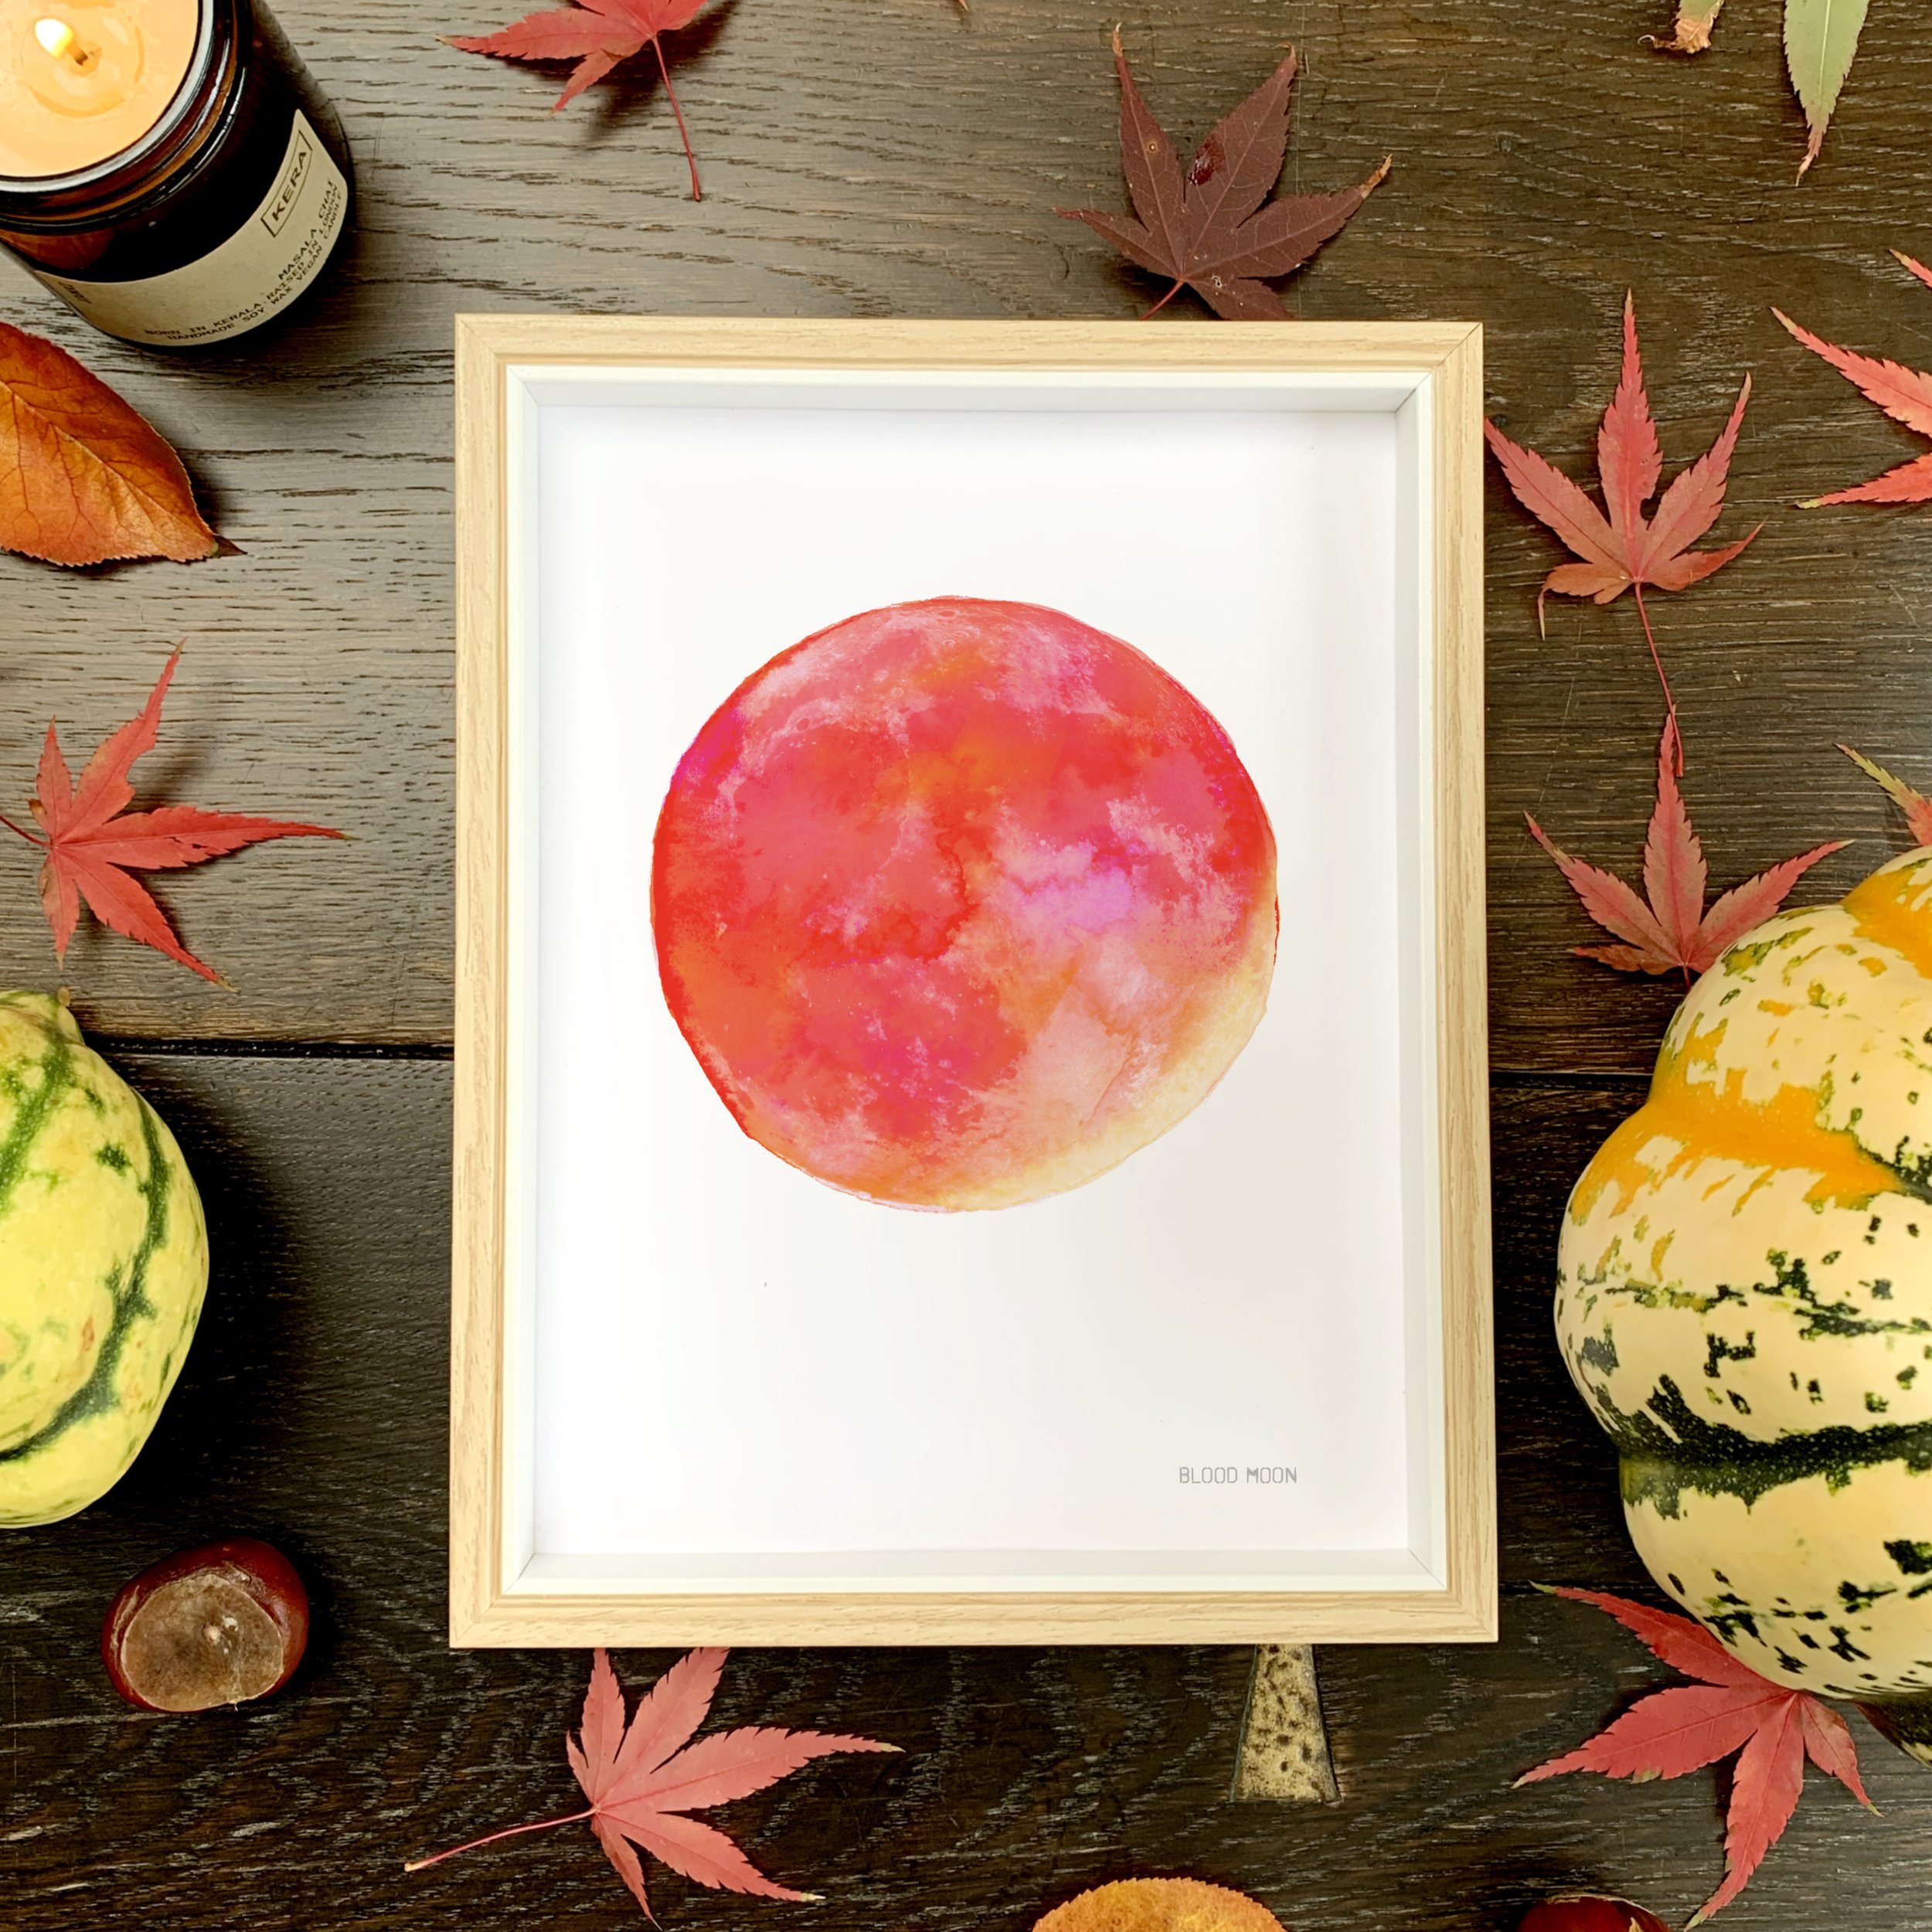 Blood Moon Print in Small A5 Frame with leaves candel and pumpkins.jpg